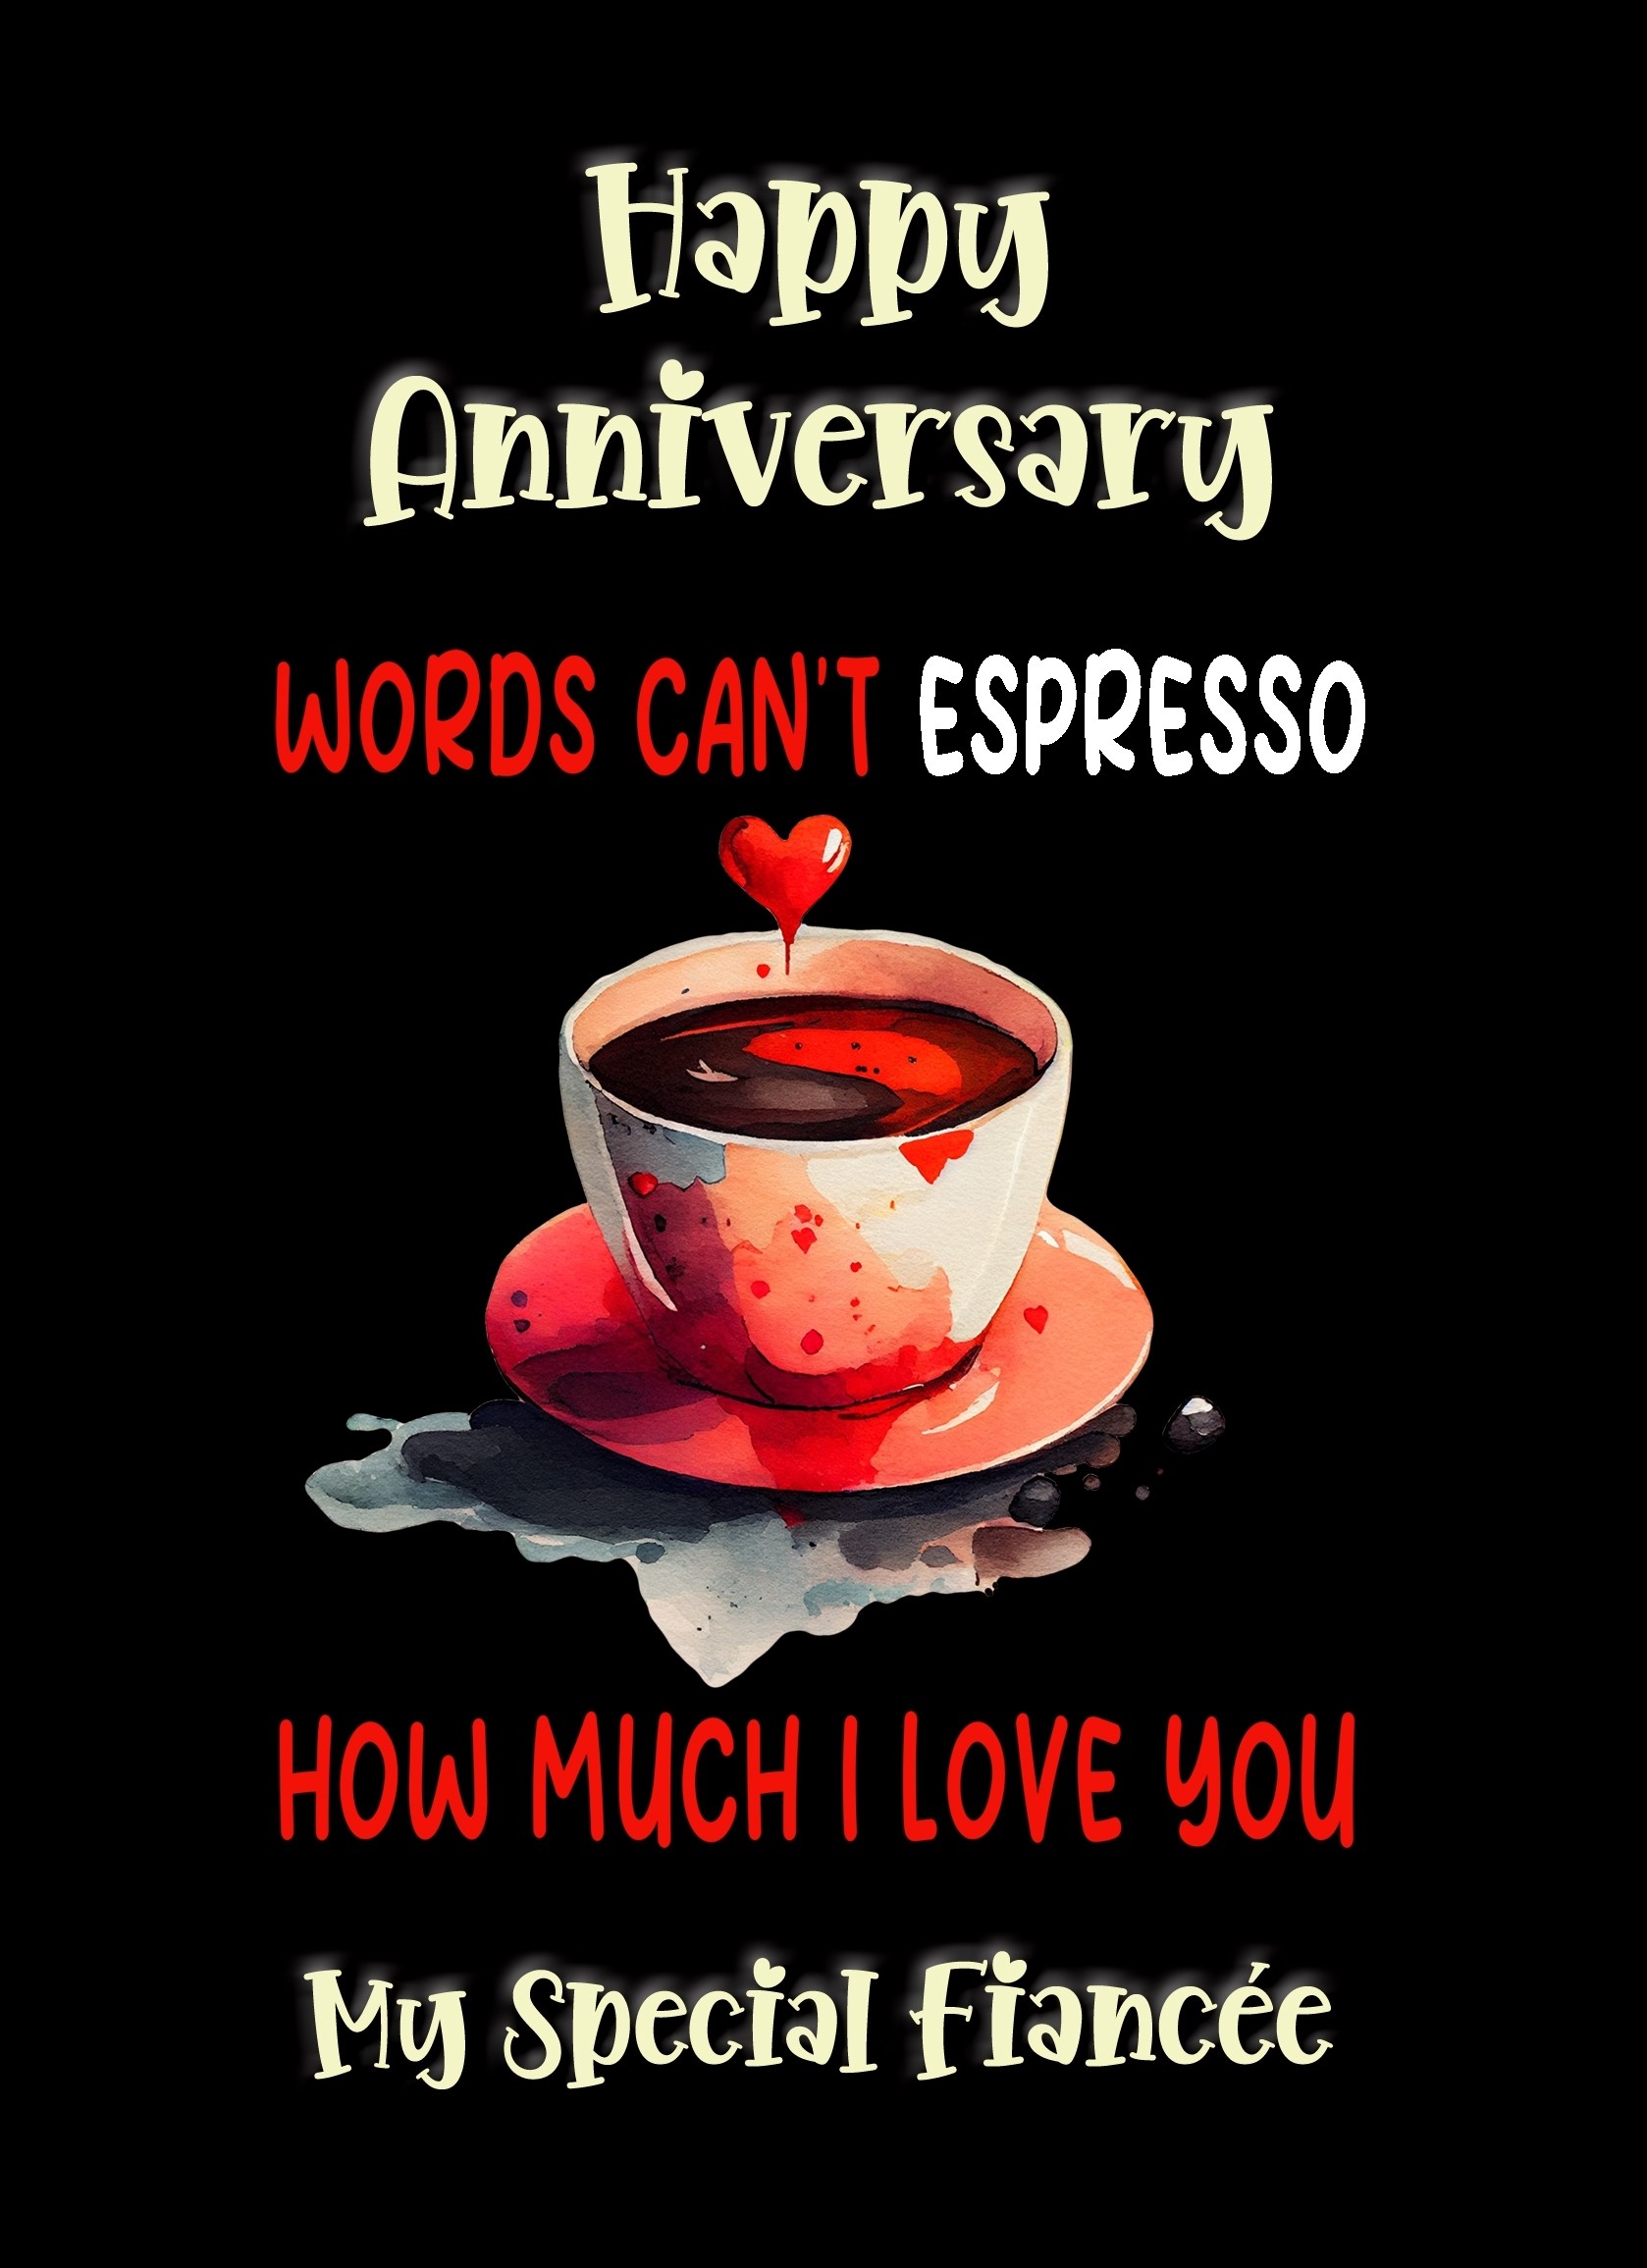 Funny Pun Romantic Anniversary Card for Fiancee (Can't Espresso)